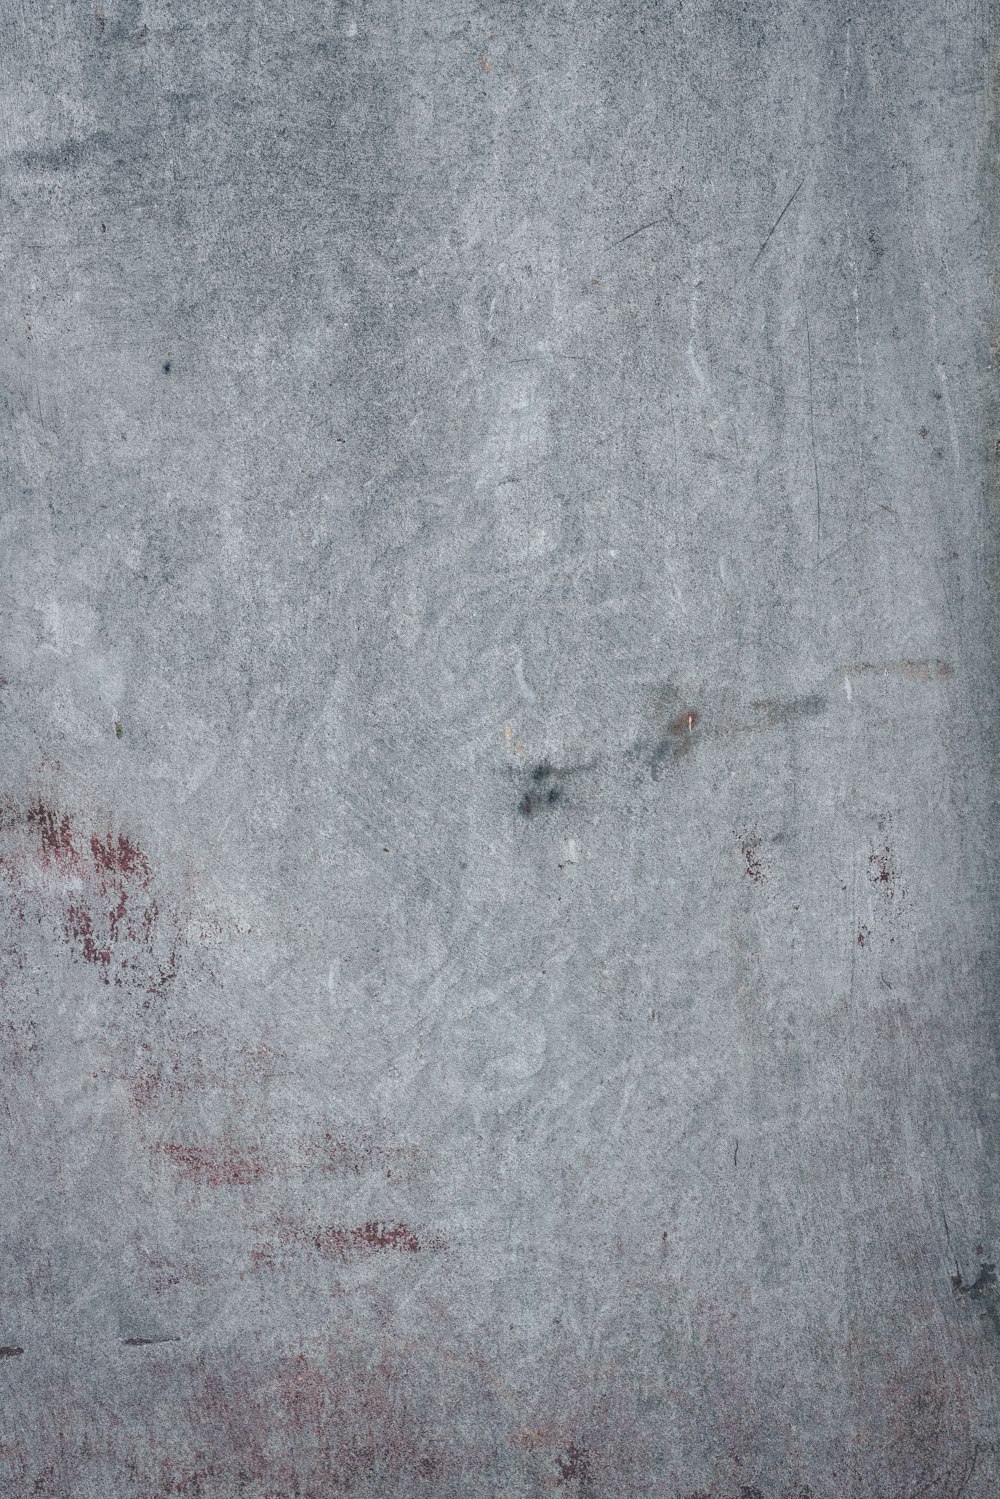 a close up of a cement surface with red stains